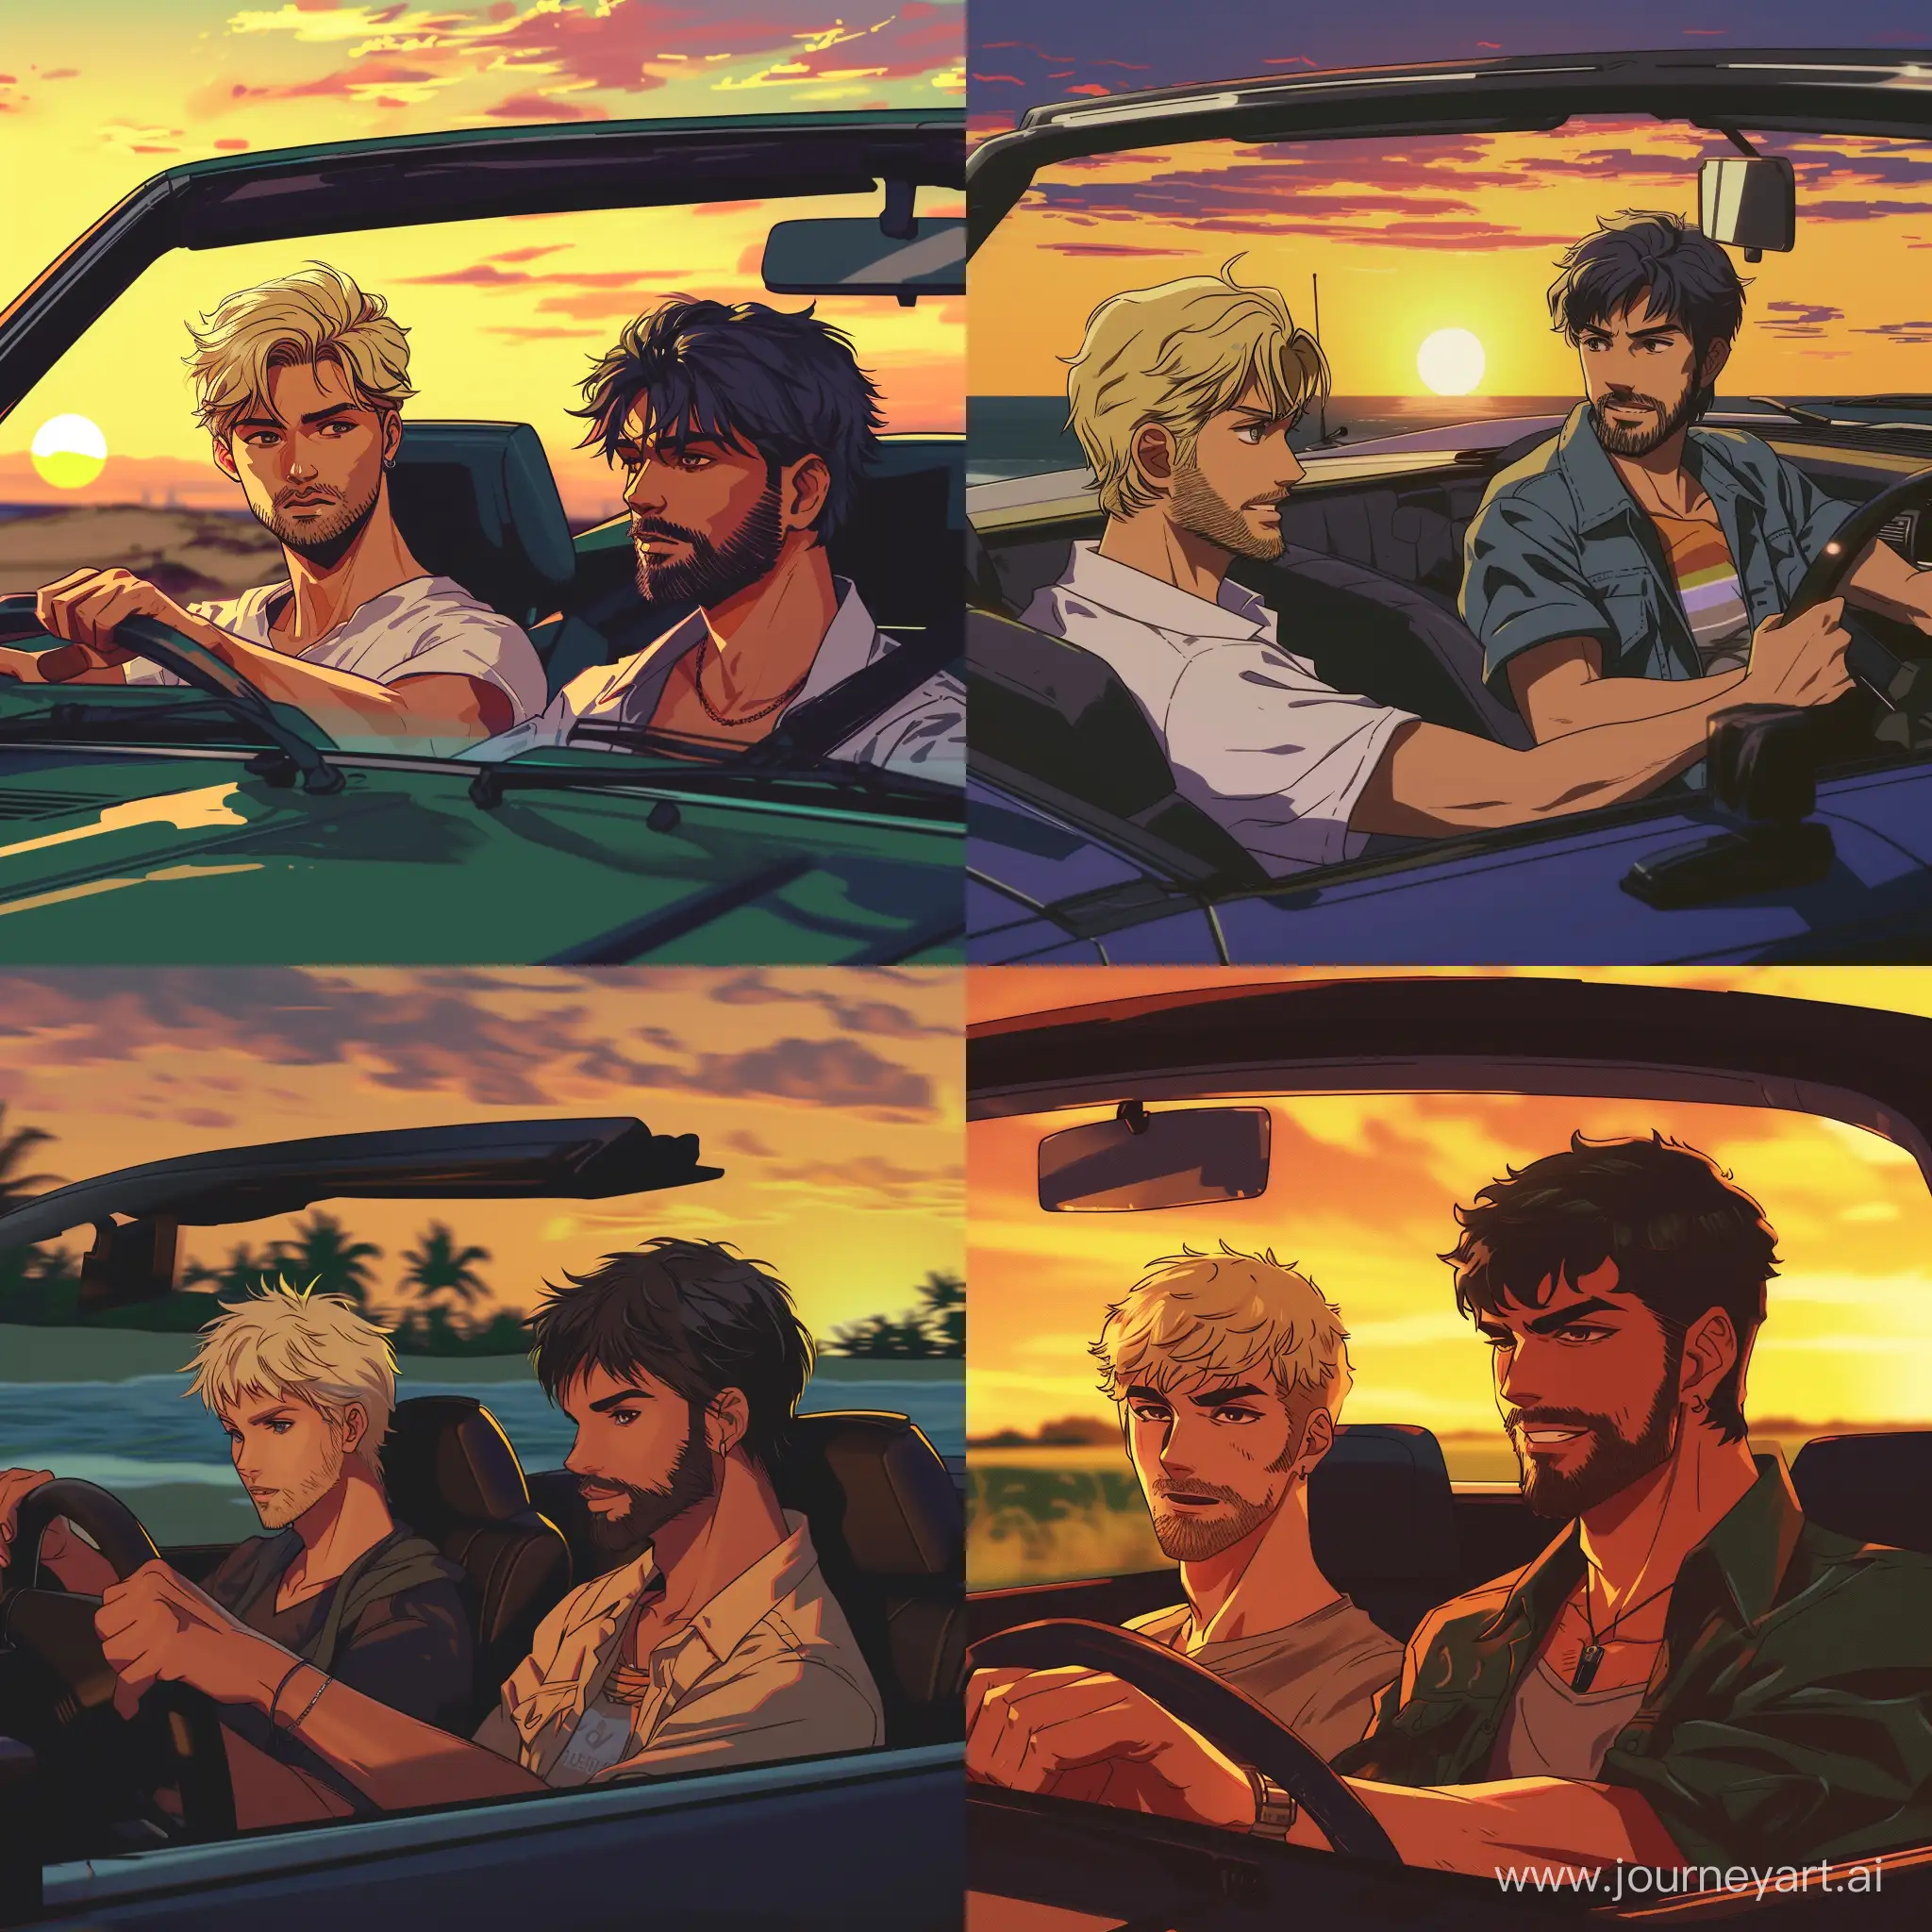 A couple of 30 year old guys driving in cabriolet to the sunset. One is blonde, another has dark hair and a short beard. 80s anime style